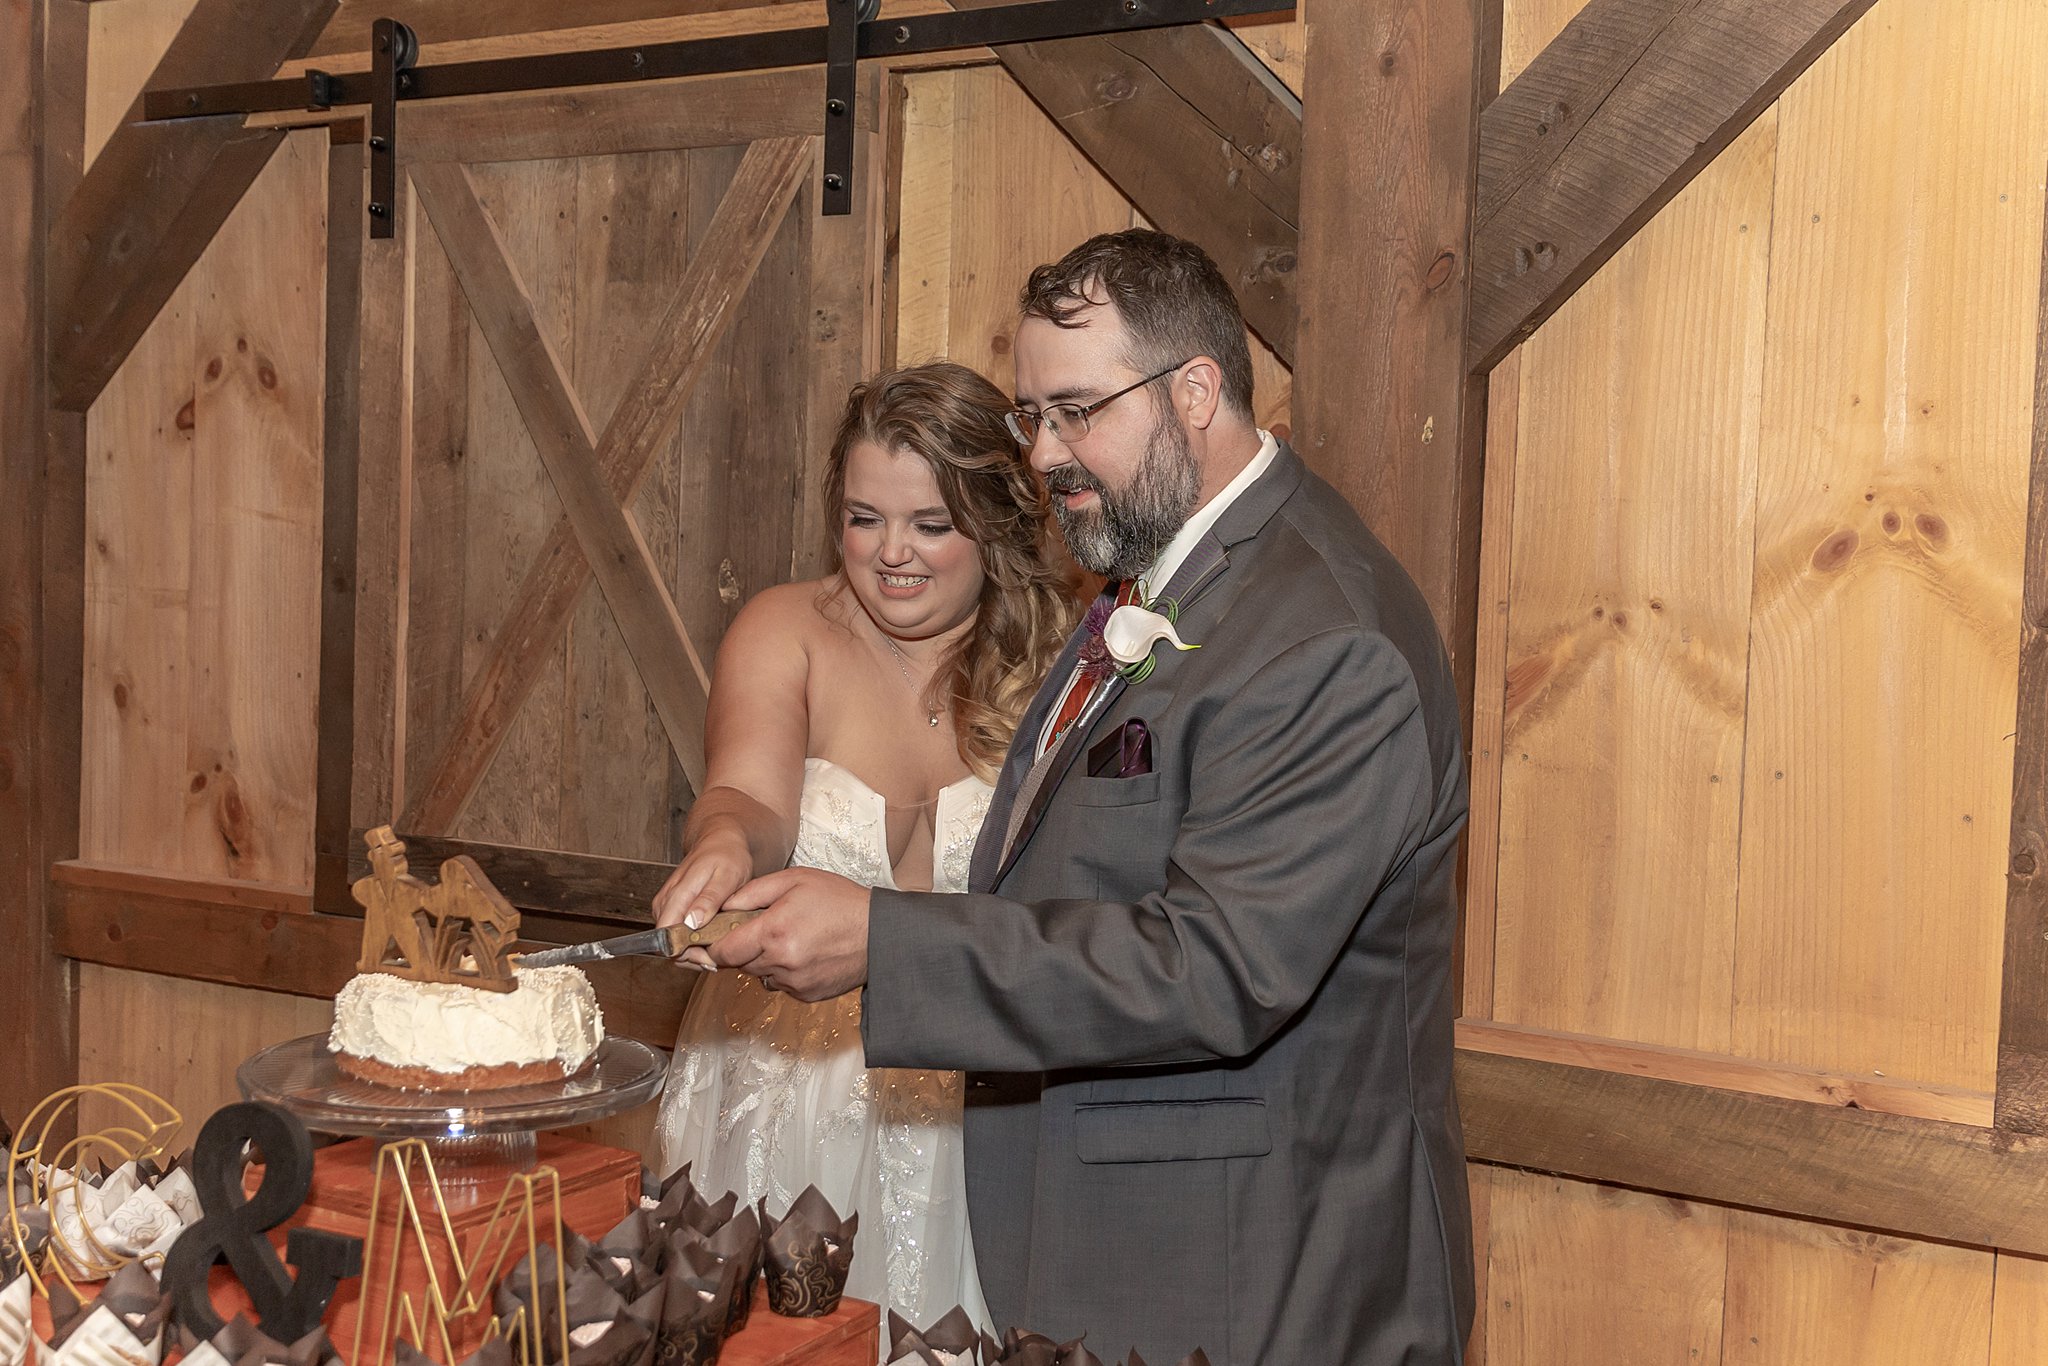 Newlyweds cut the cake in front of barn window